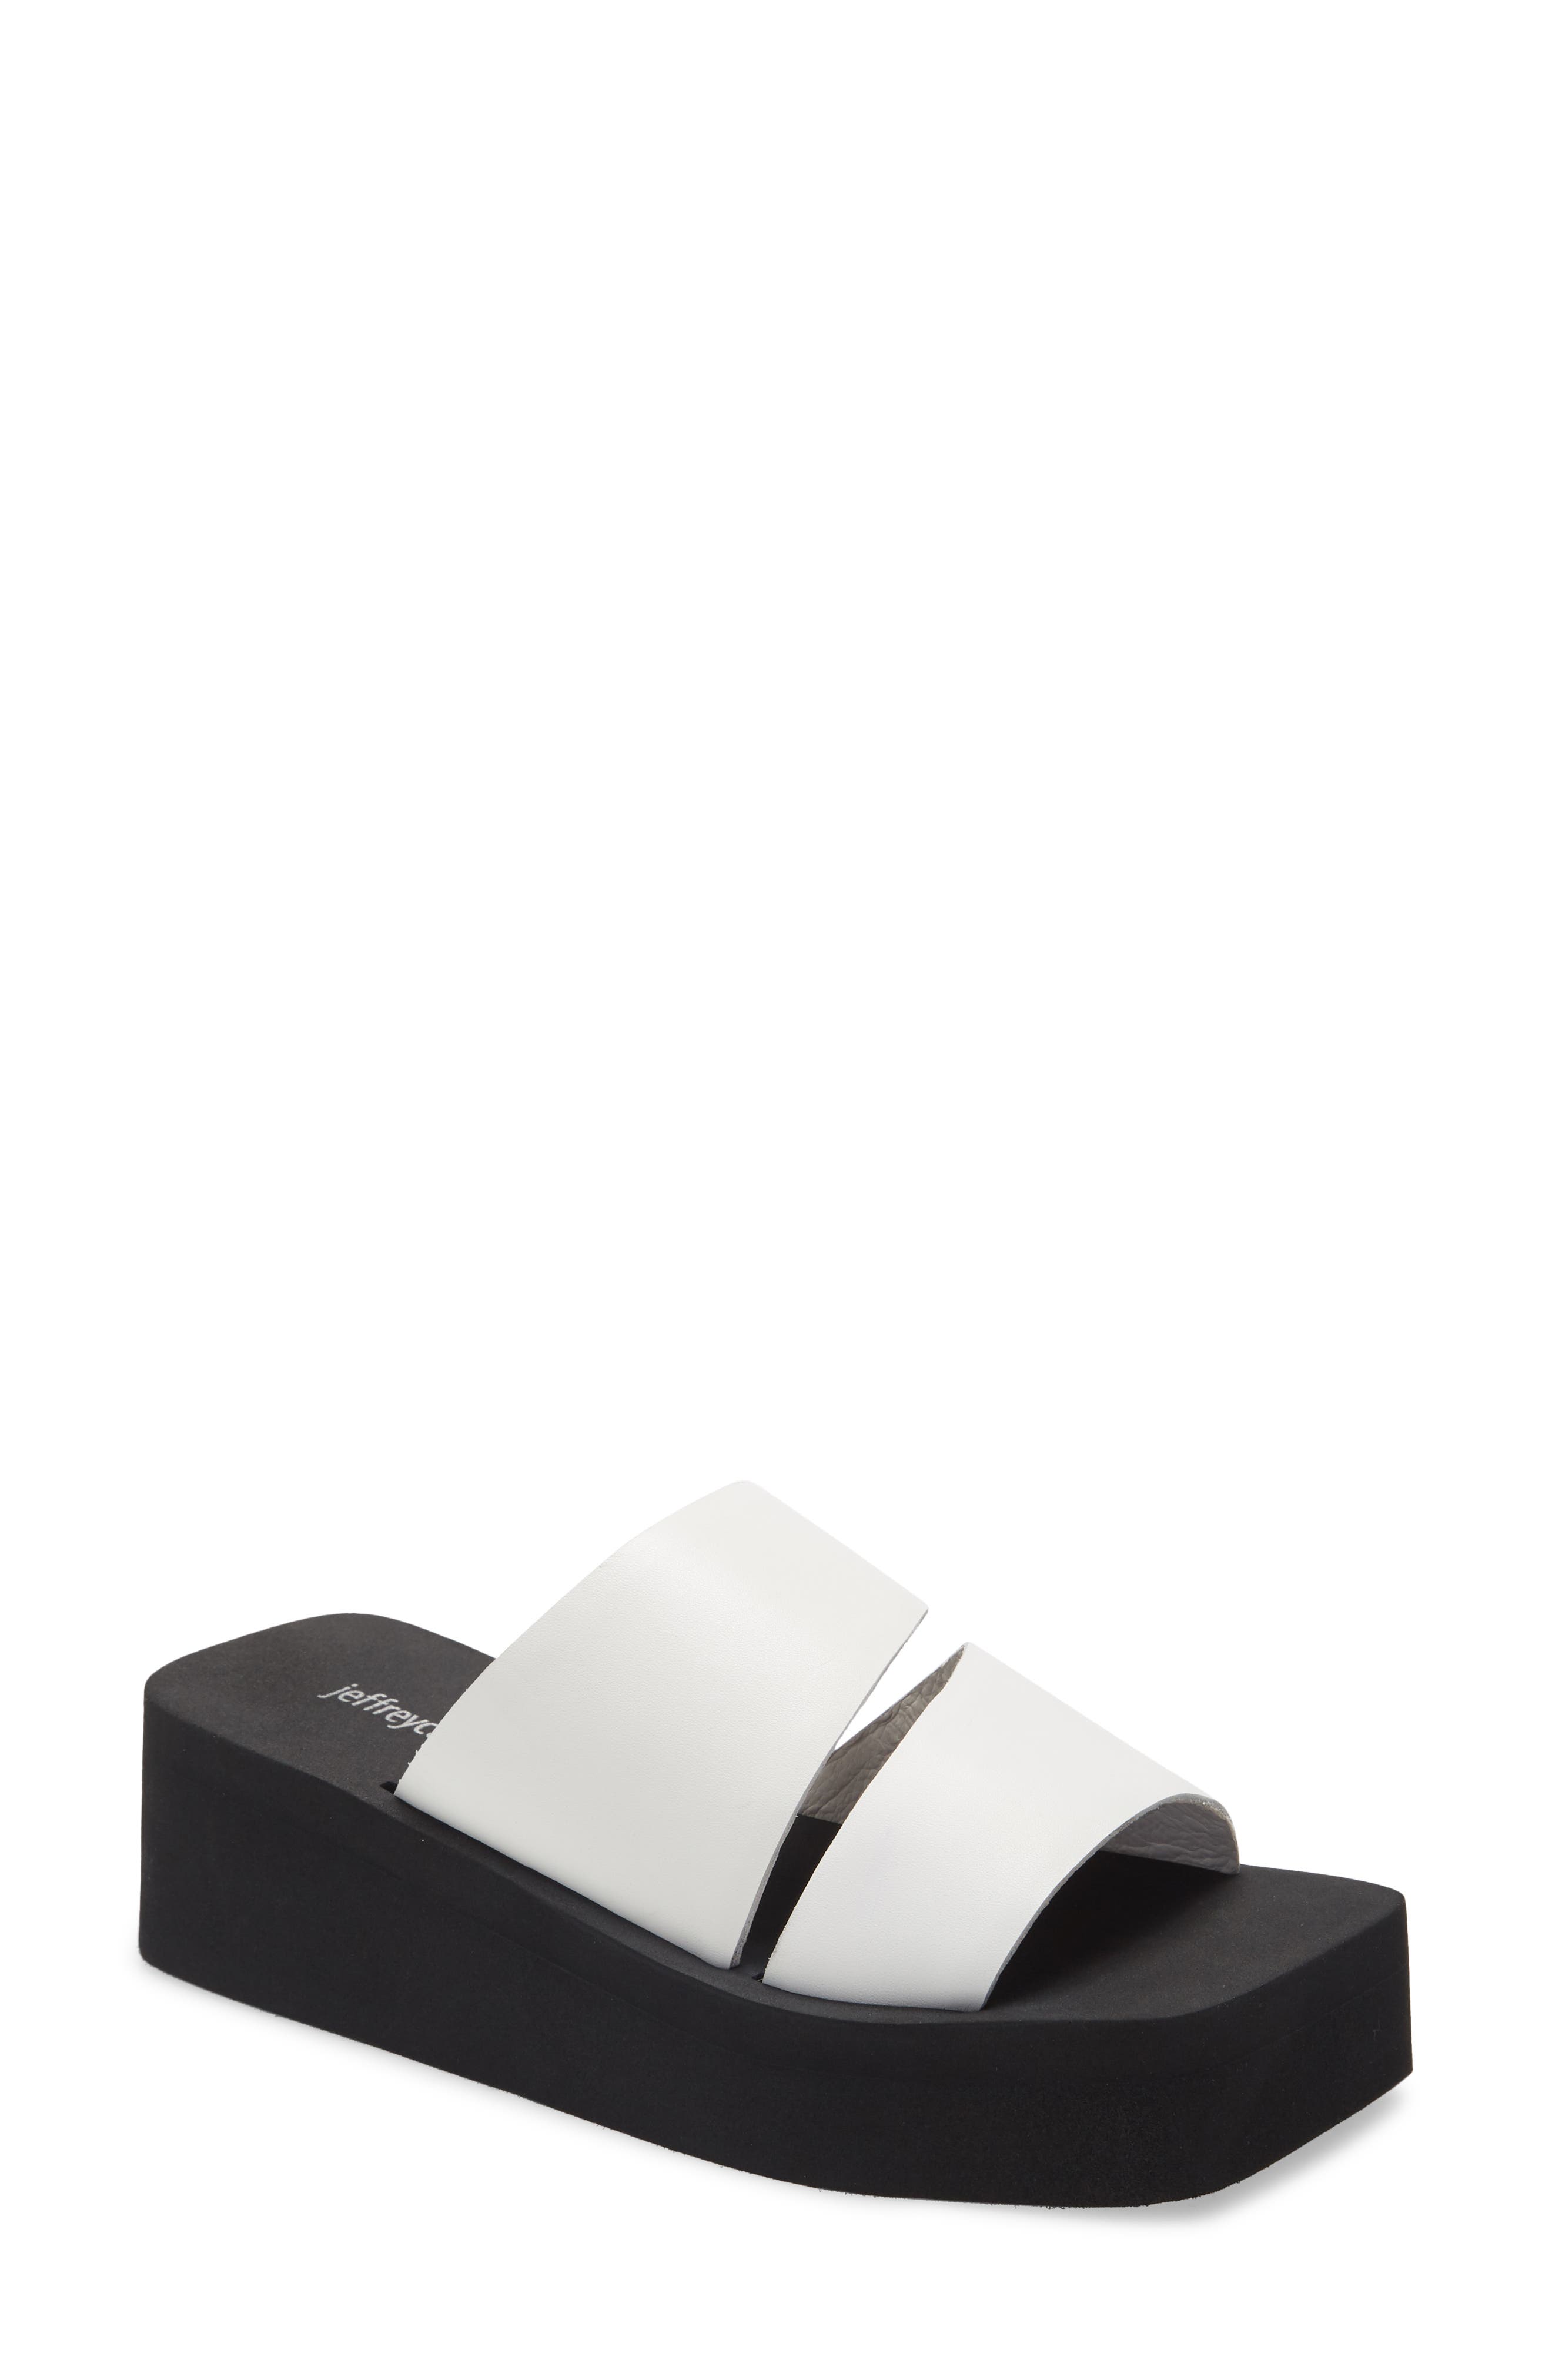 nordstrom shoes mules